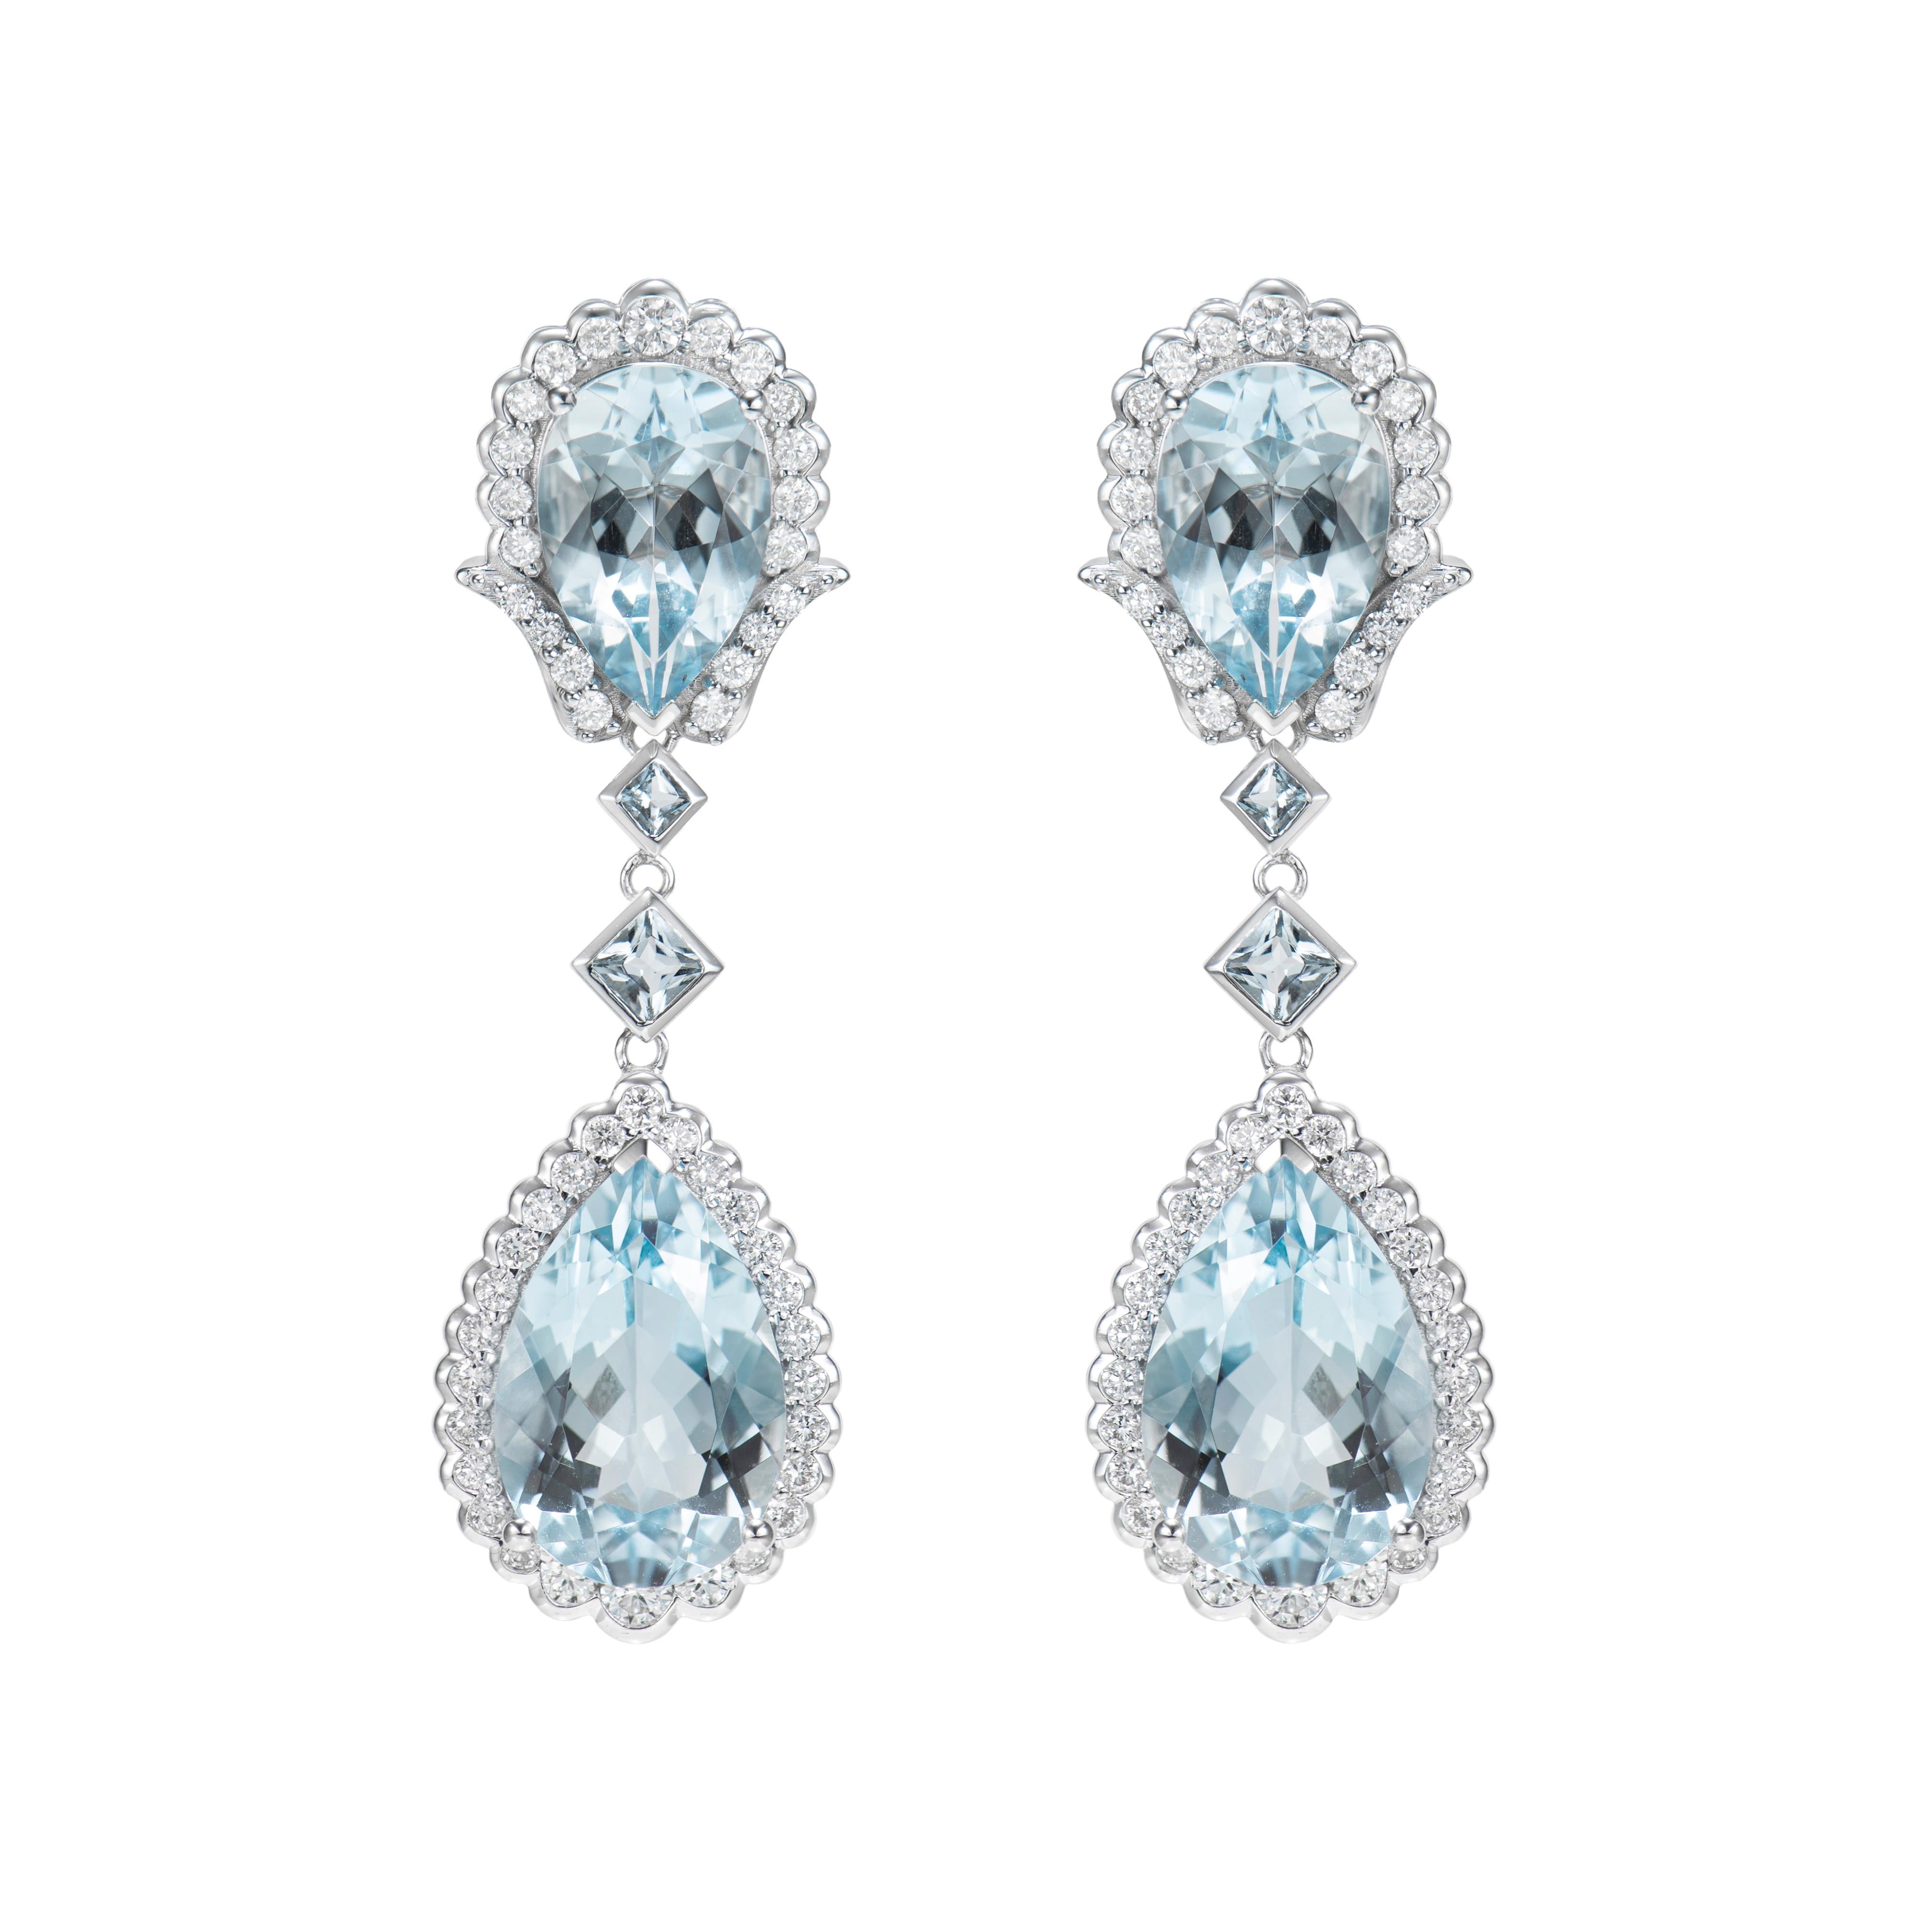 Contemporary Aquamarine and White Diamond Teardrops Earring in 18 Karat White Gold. For Sale